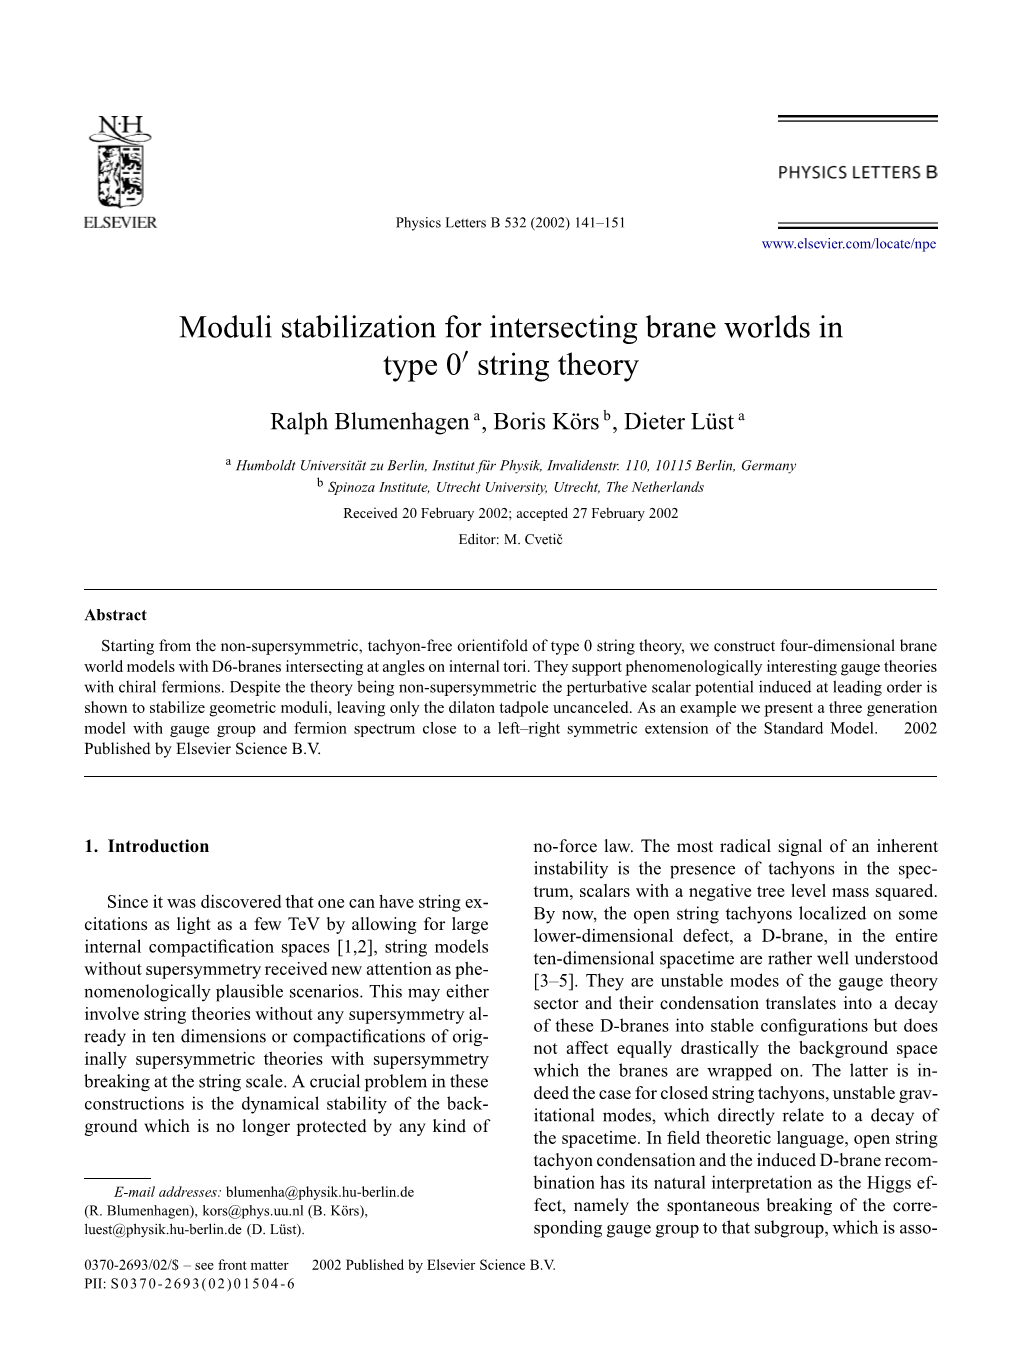 Moduli Stabilization for Intersecting Brane Worlds in Type 0 String Theory